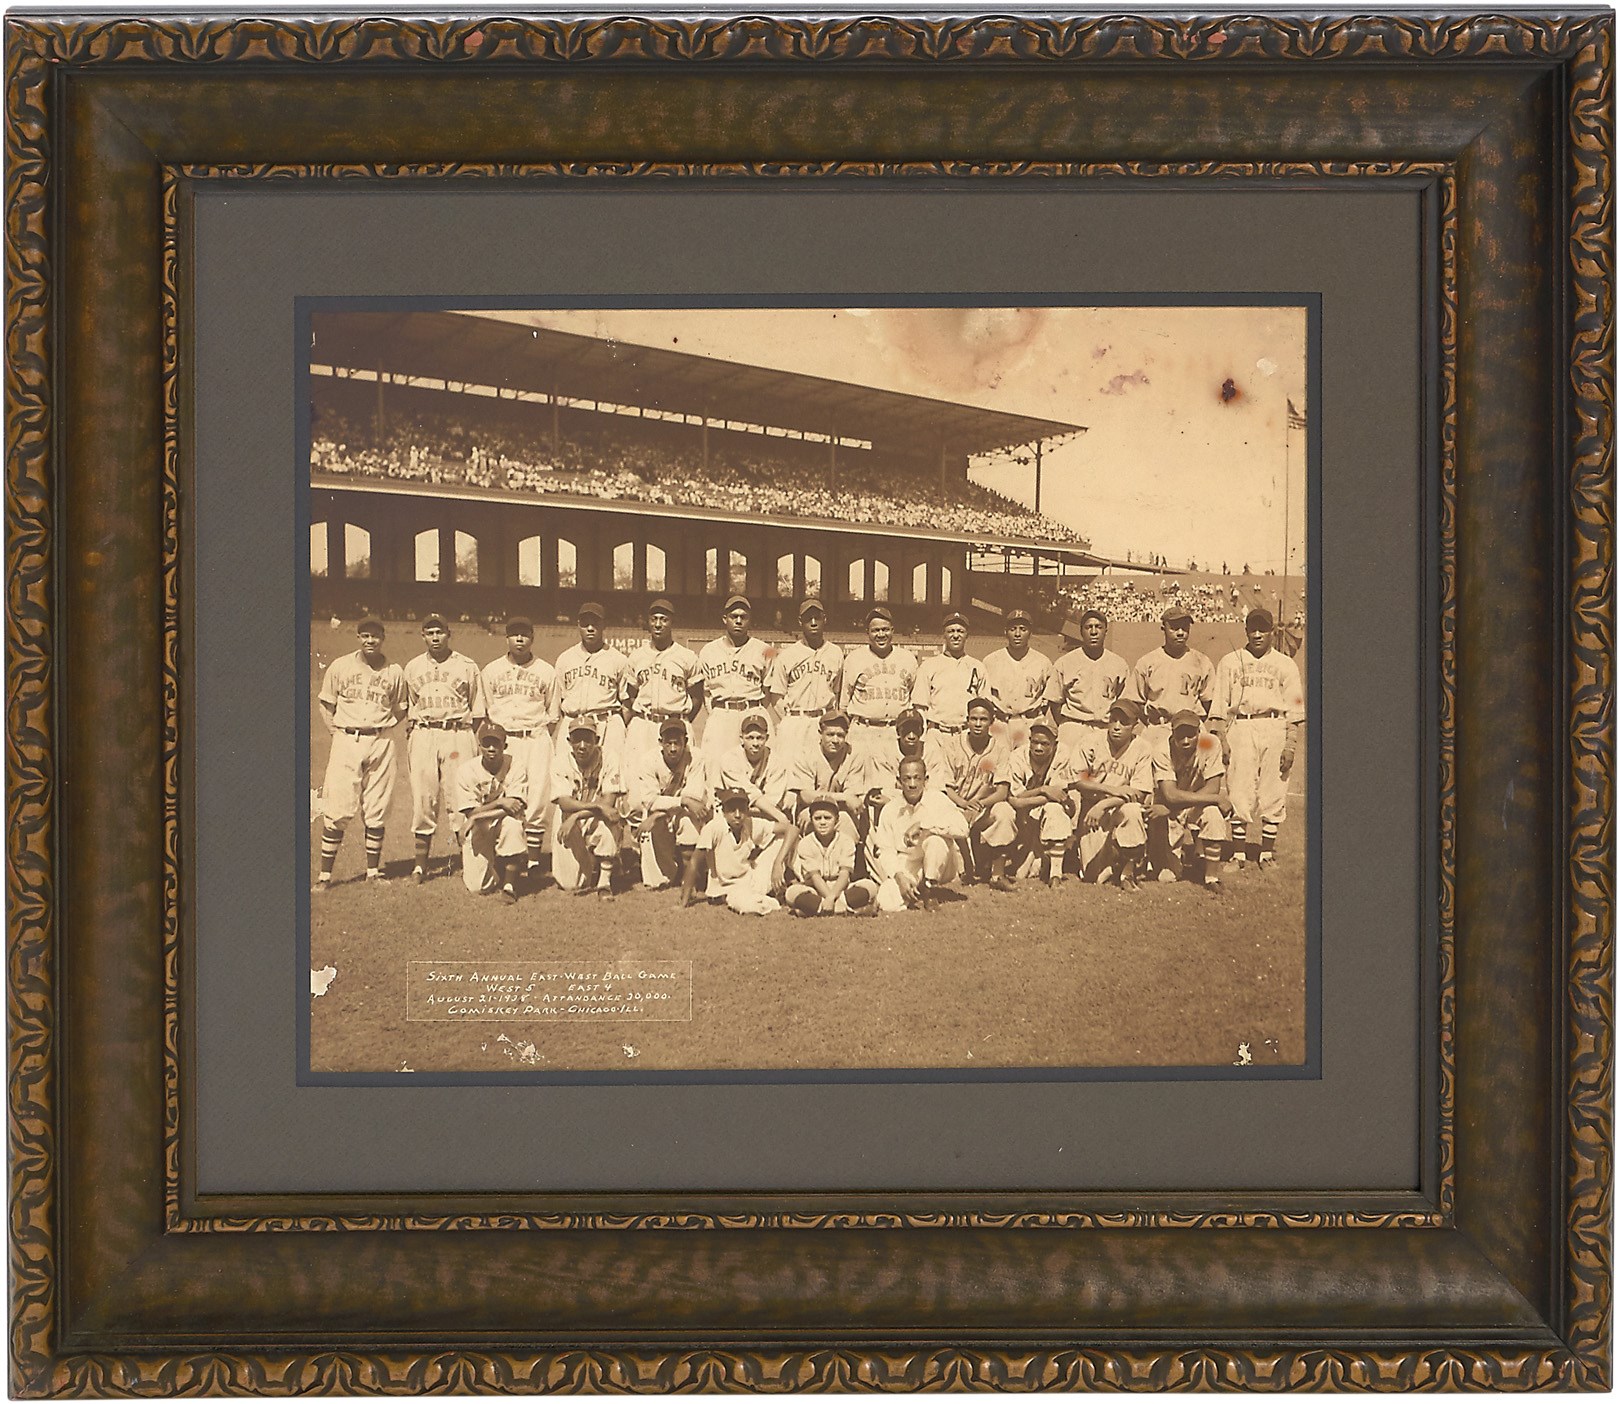 - 1938 Negro League All-Star Game Oversized Photograph